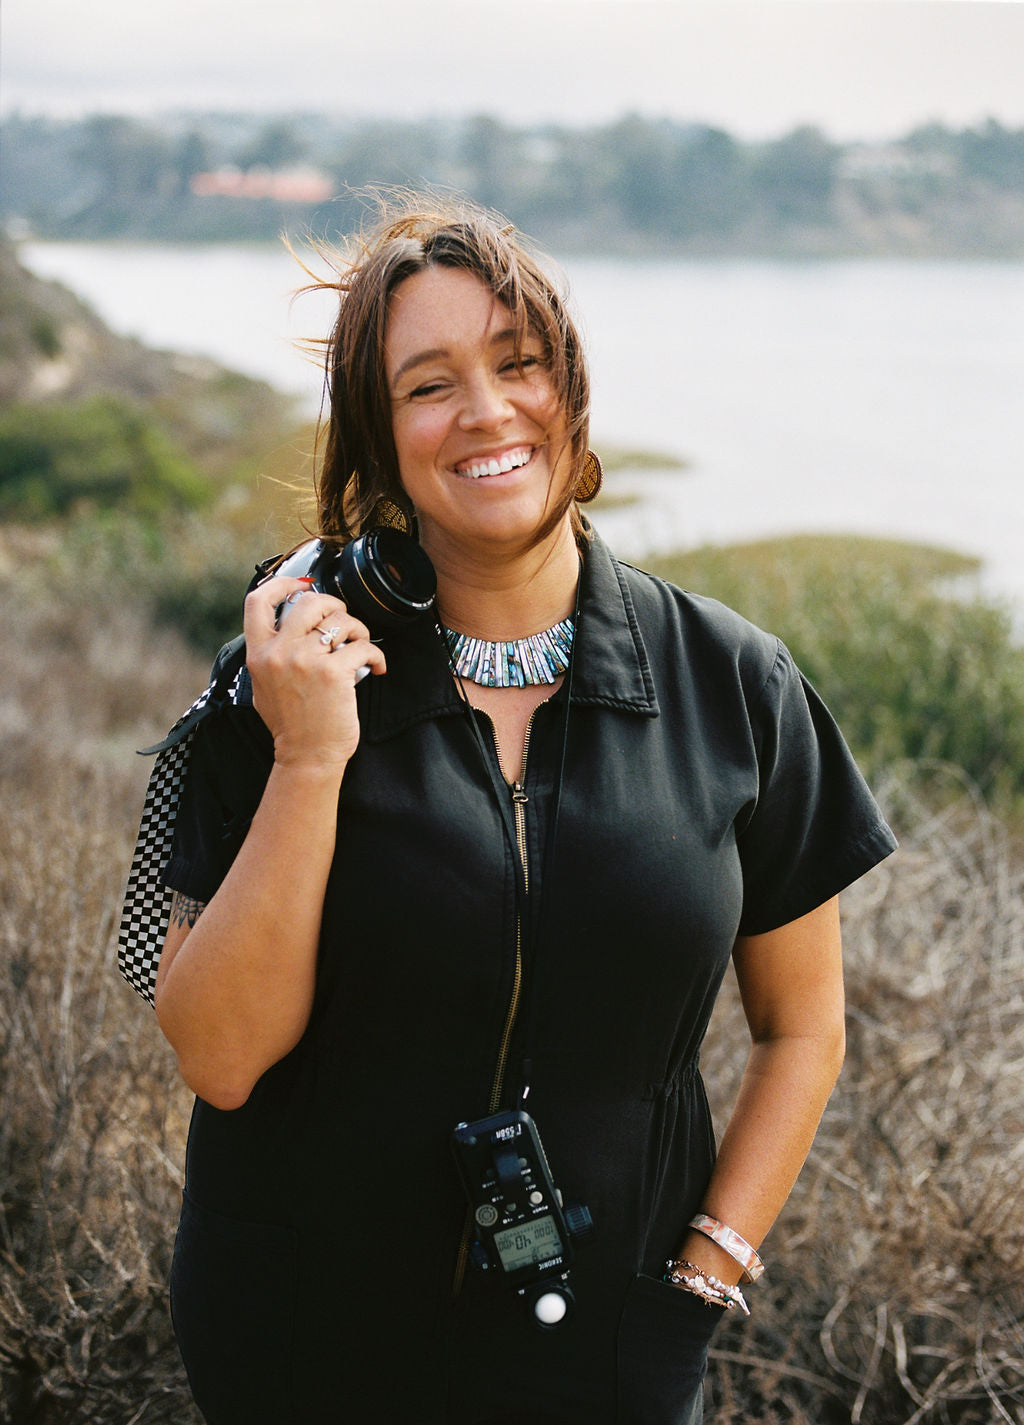 Alexis Munoa Dyer, of the Pechanga Band of Luiseño Indians, shares what it means to be an Indigenous woman in so called California | Thread Spun Encinitas Blog